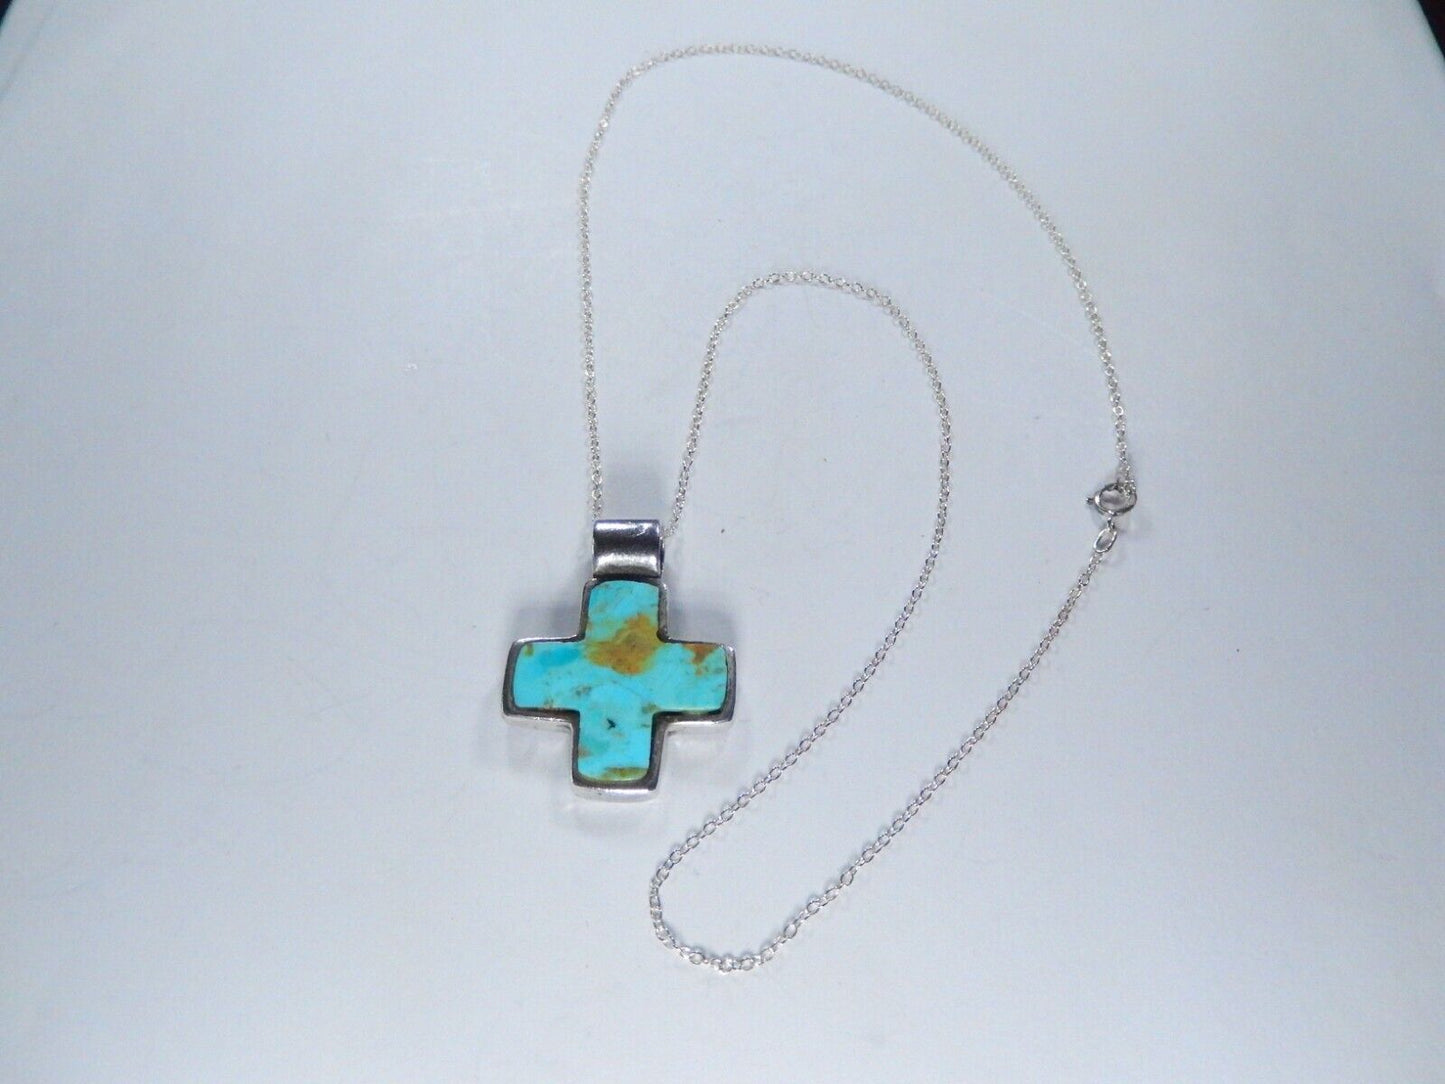 *VINTAGE* Sterling Silver Southwest Handmade Turquoise Inlay Cross Pendant w/18"